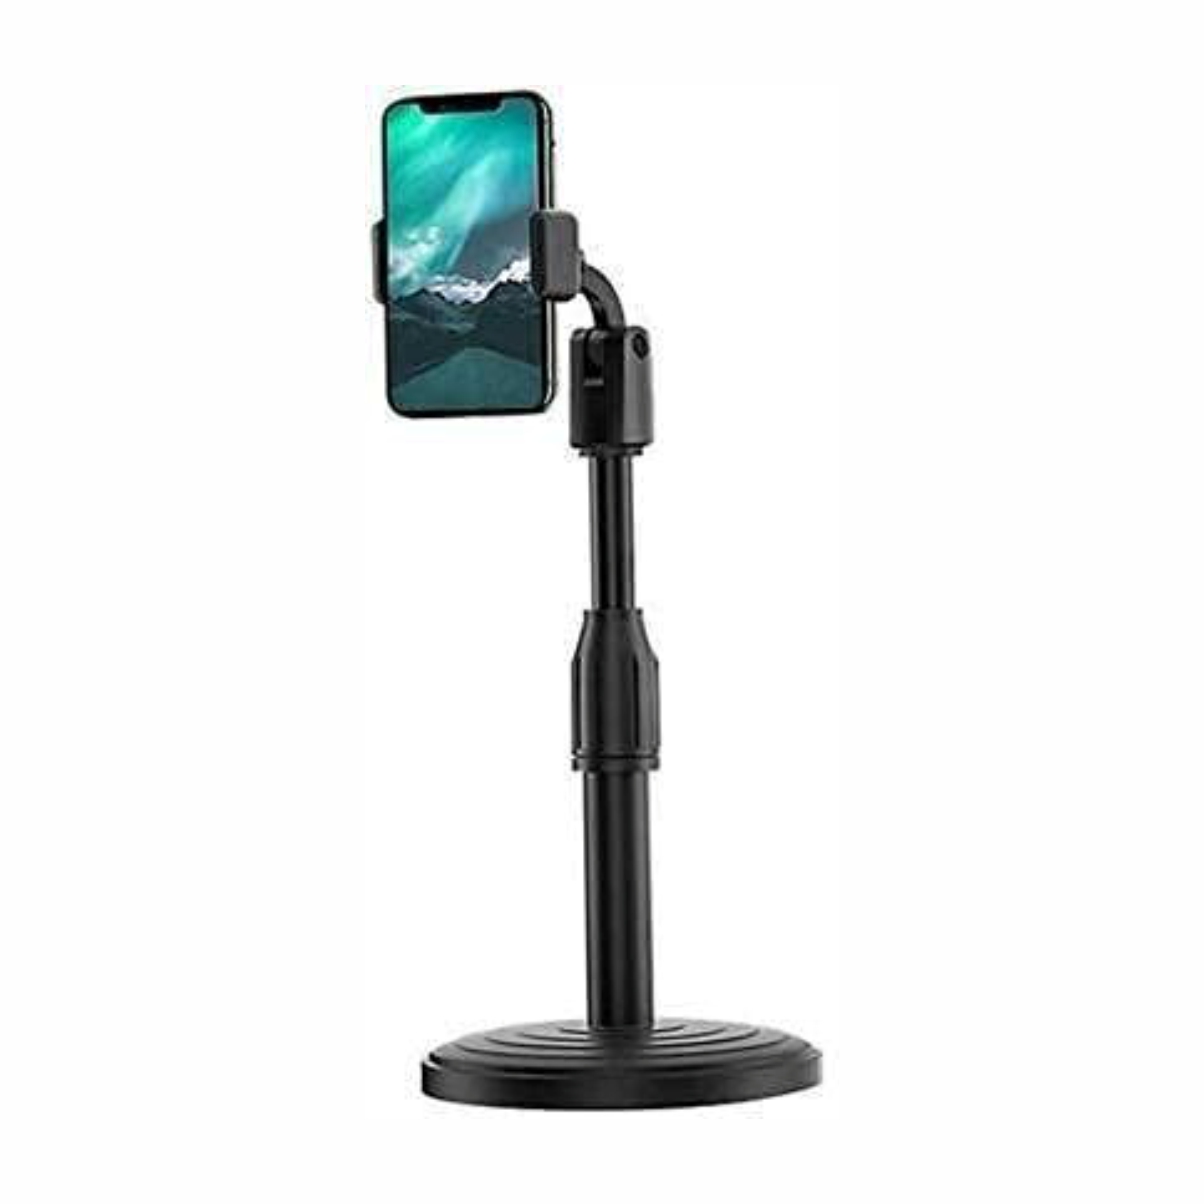 Mobile Phone Stand | Cell Phone Holder Comes with Solid Body/Adjustable Height & 360 Degree Rotate Angle | Best Stand for All Mobile Phones & Tablets